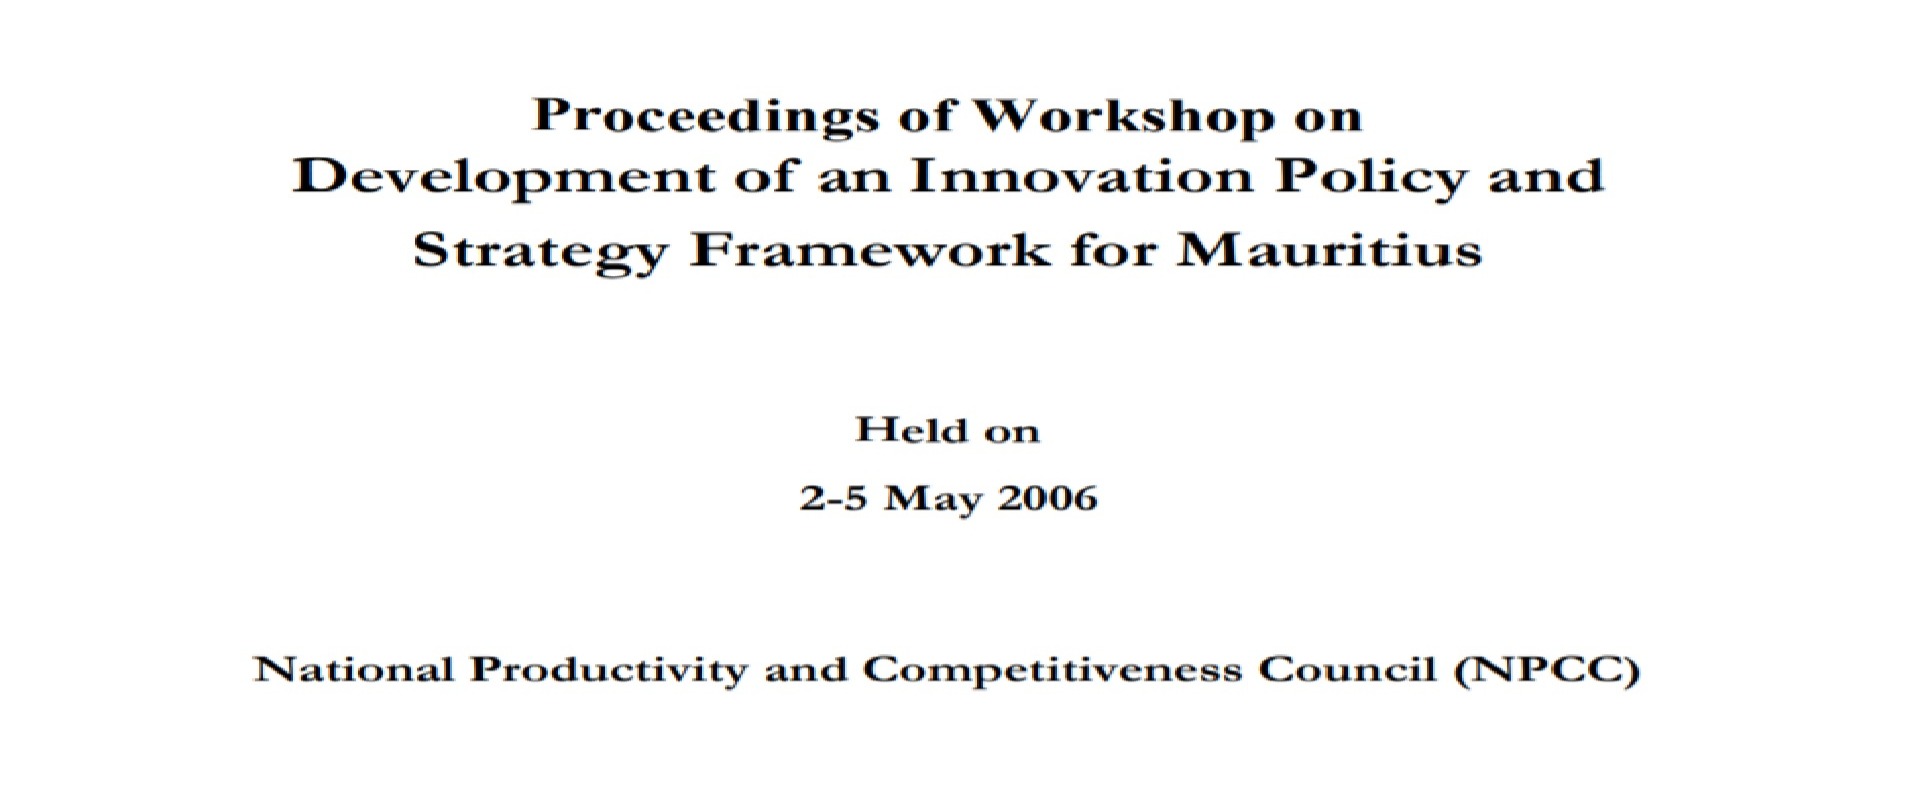 Development of an Innovation Policy and Strategy Framework